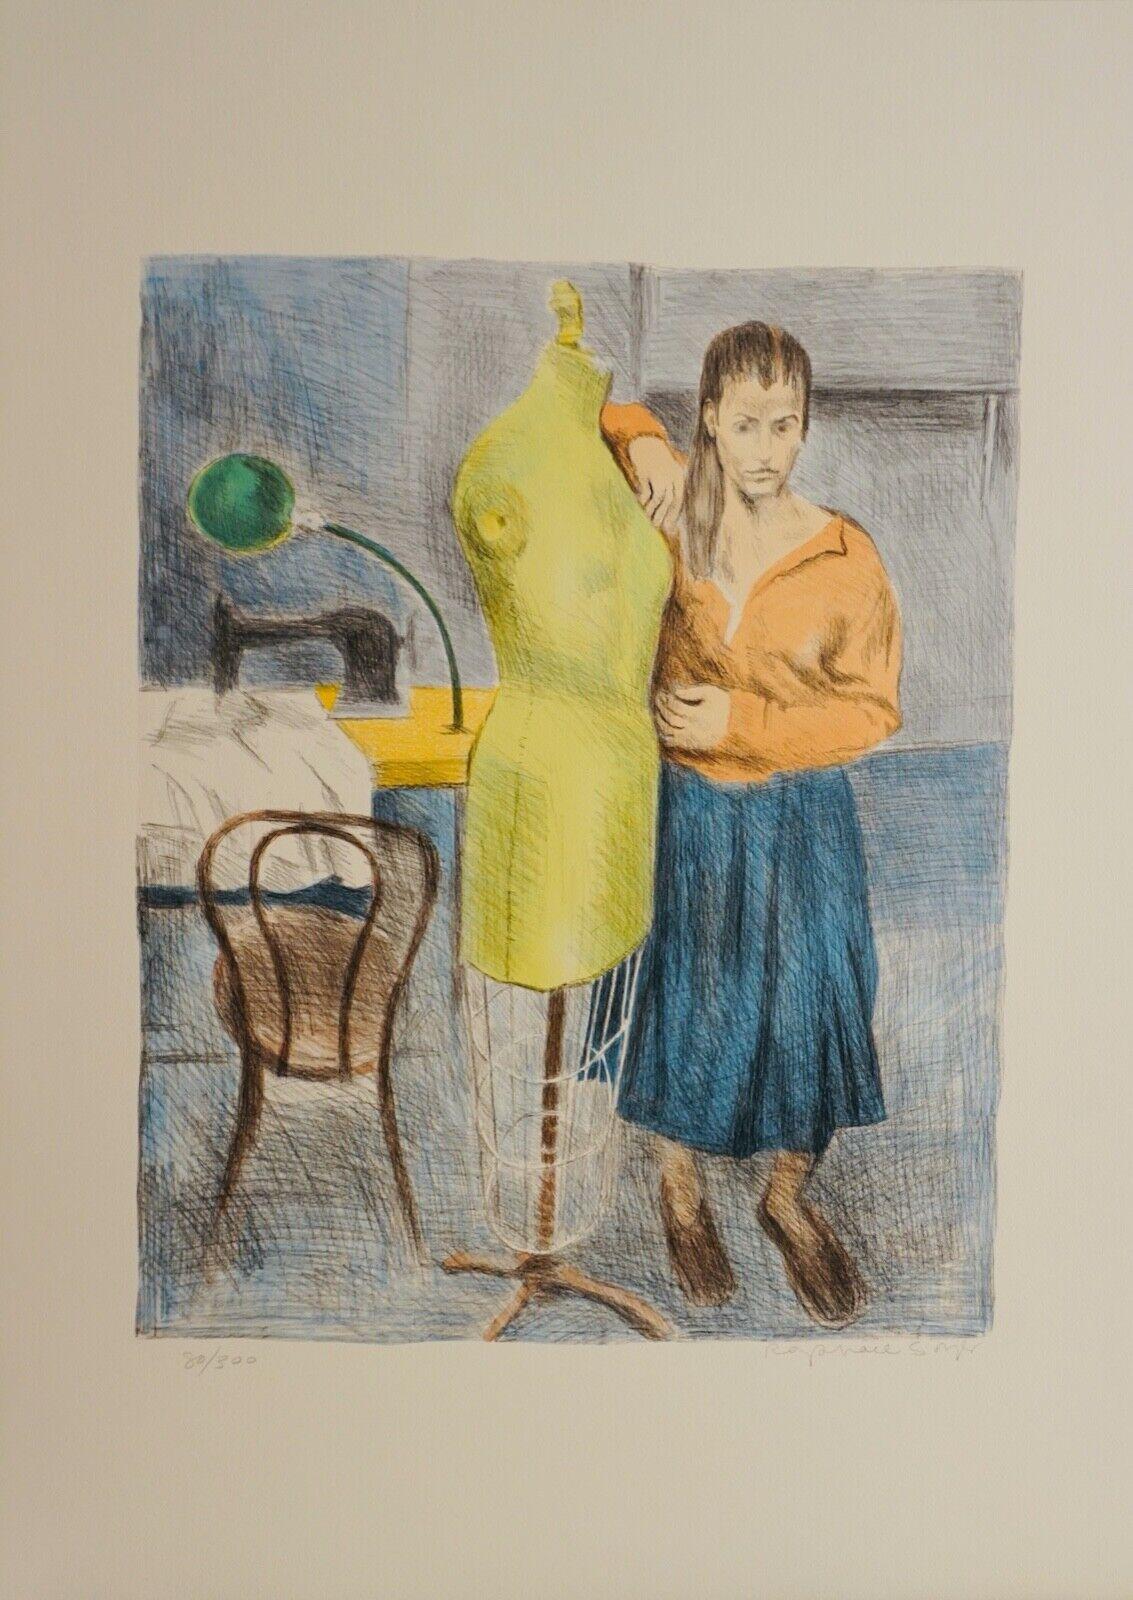 Seamstress 1 - Contemporary Print by Raphael Soyer